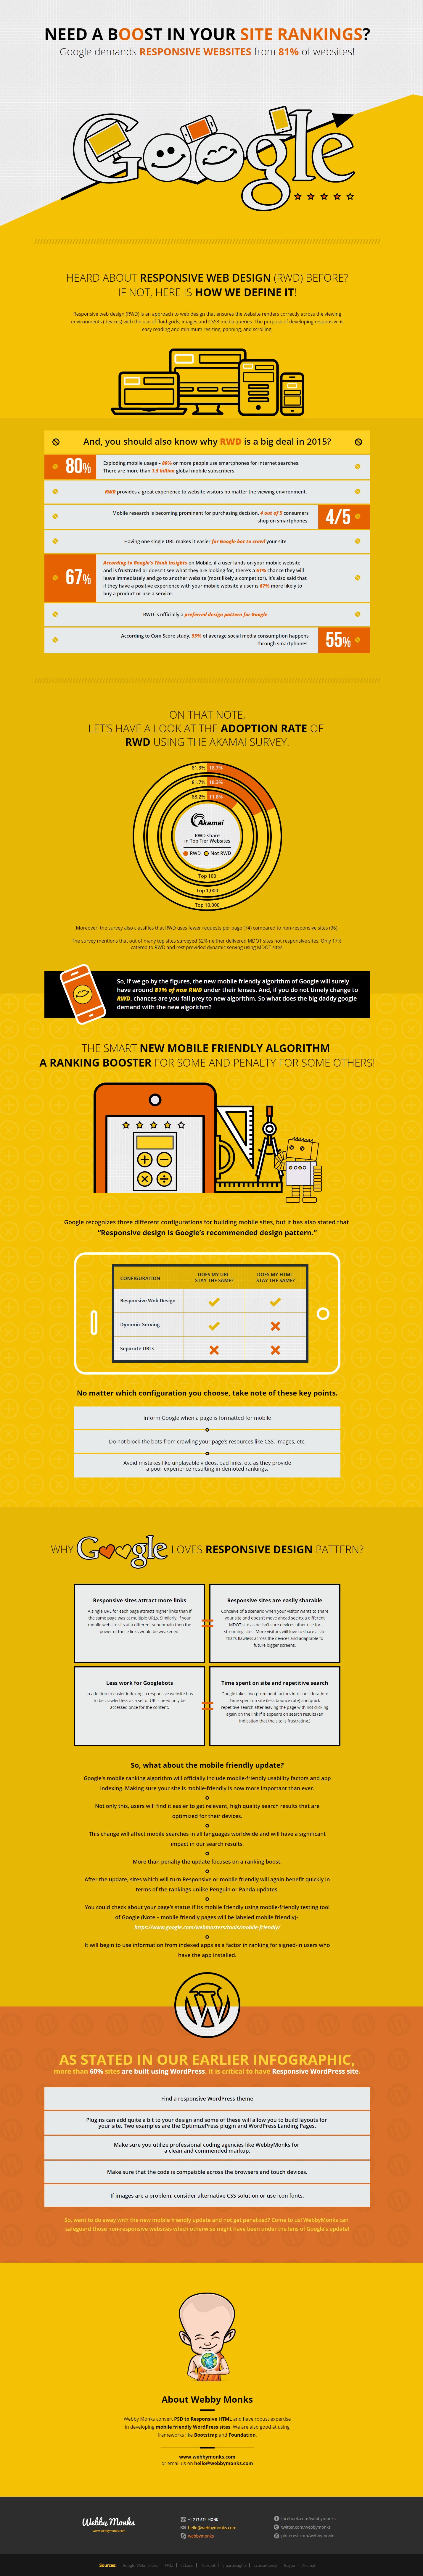 81% of Websites Might Be Affected By Google’s New Mobile-Friendly Algorithm (Infographic)